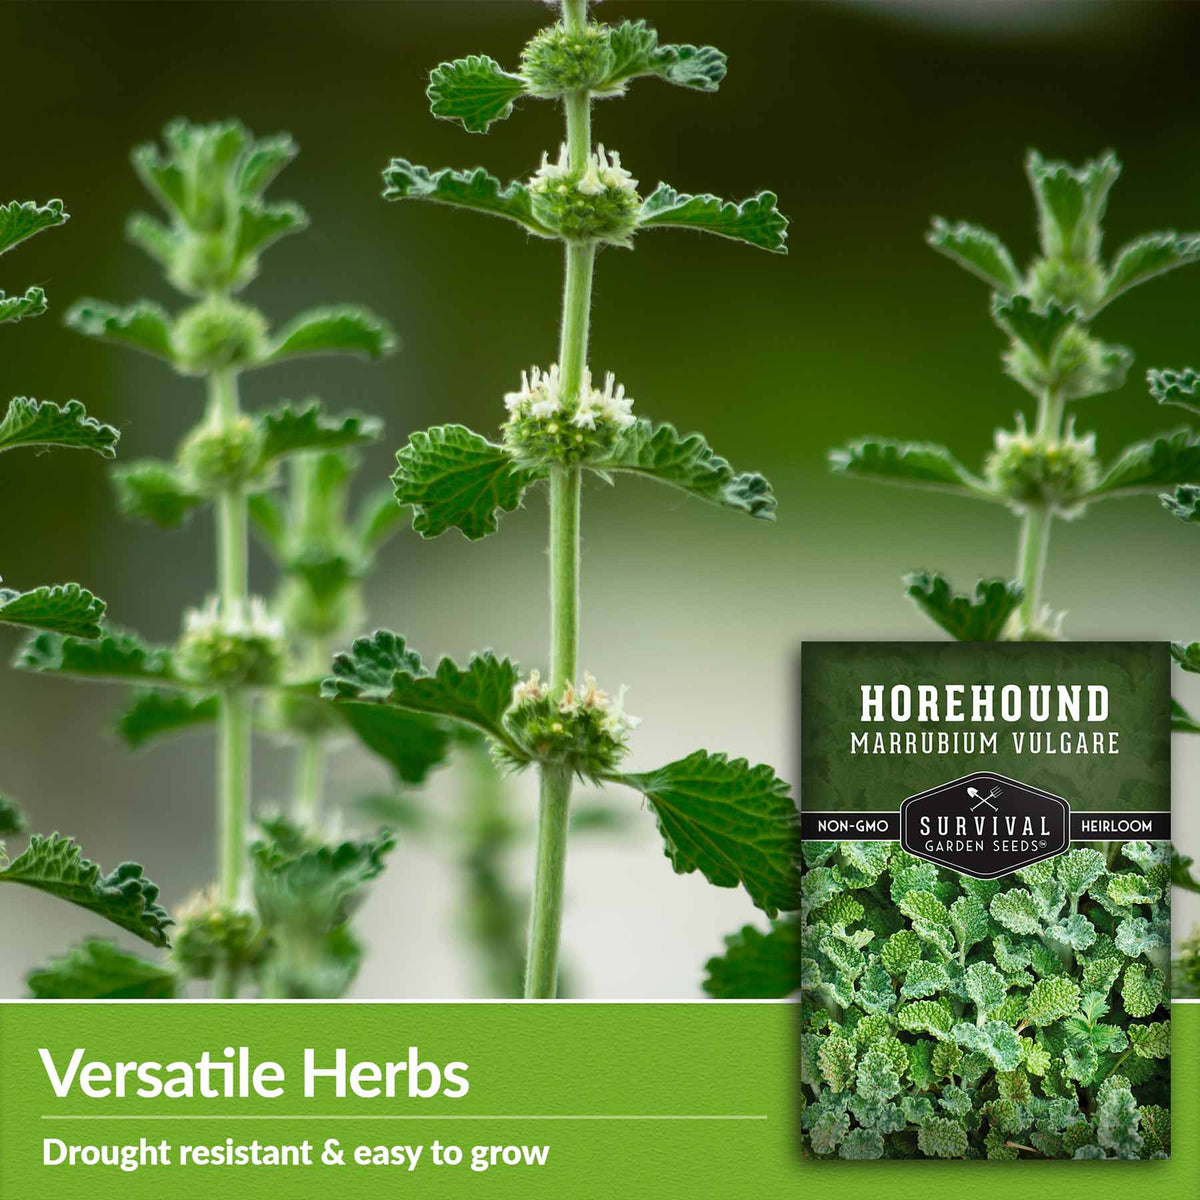 Versatile herbs - drought resistant and easy to grow